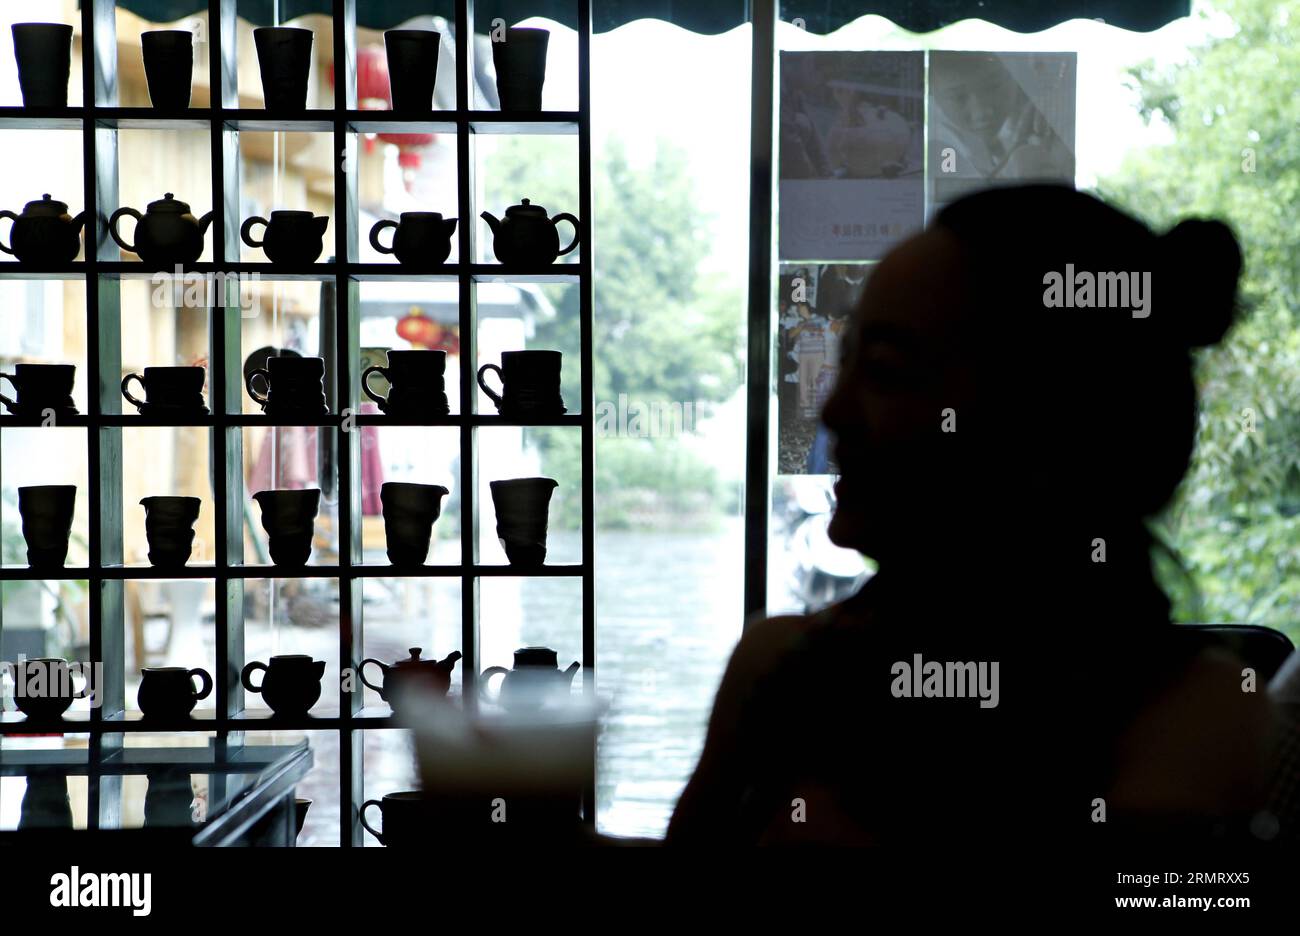 (140806) -- BEIJING, Aug. 6, 2014 -- Zhang Lingyun waits for a fellow ceramic artist at a cafe in Jingdezhen, east China s Jiangxi Province, July 17, 2014. Zhang Lingyun is 40. It s been 20 years since the ceramic artist came to Jingdezhen, China s porcelain capital . Zhang s story with ceramics had a random, romantic start: she knew barely anything about ceramics before she came across the name Jingdezhen Ceramic Institute (JCI) when applying for college. Ceramics sounded interesting so I filed the application for JCI. The whim of impulse had made great difference in Zhang s life. Her very fi Stock Photo